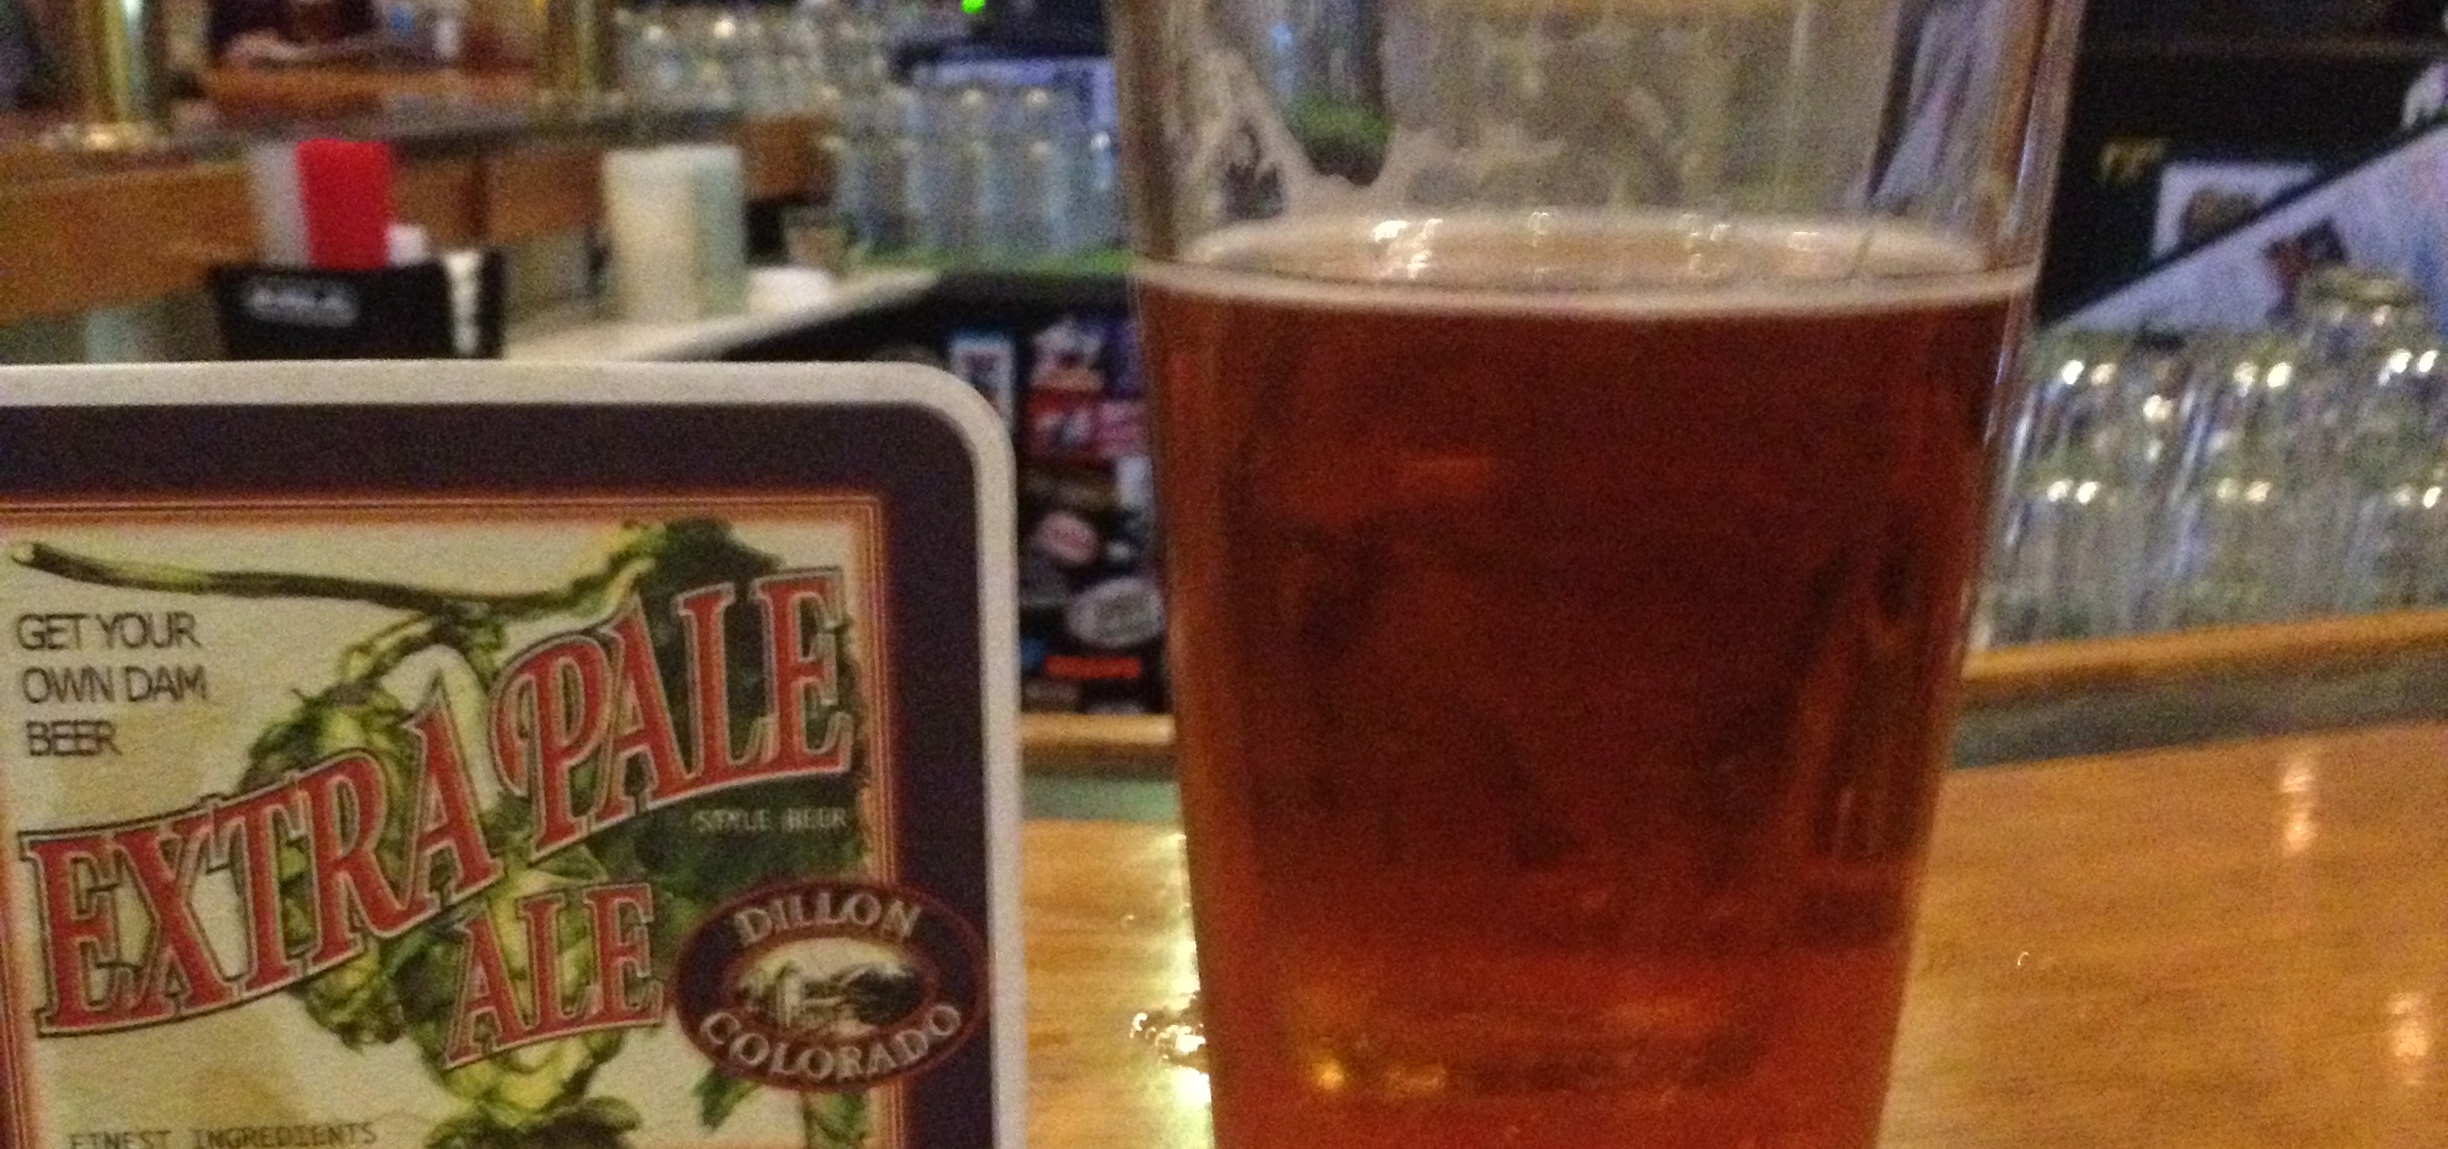 Dillon Dam Brewery – Extra Pale Ale